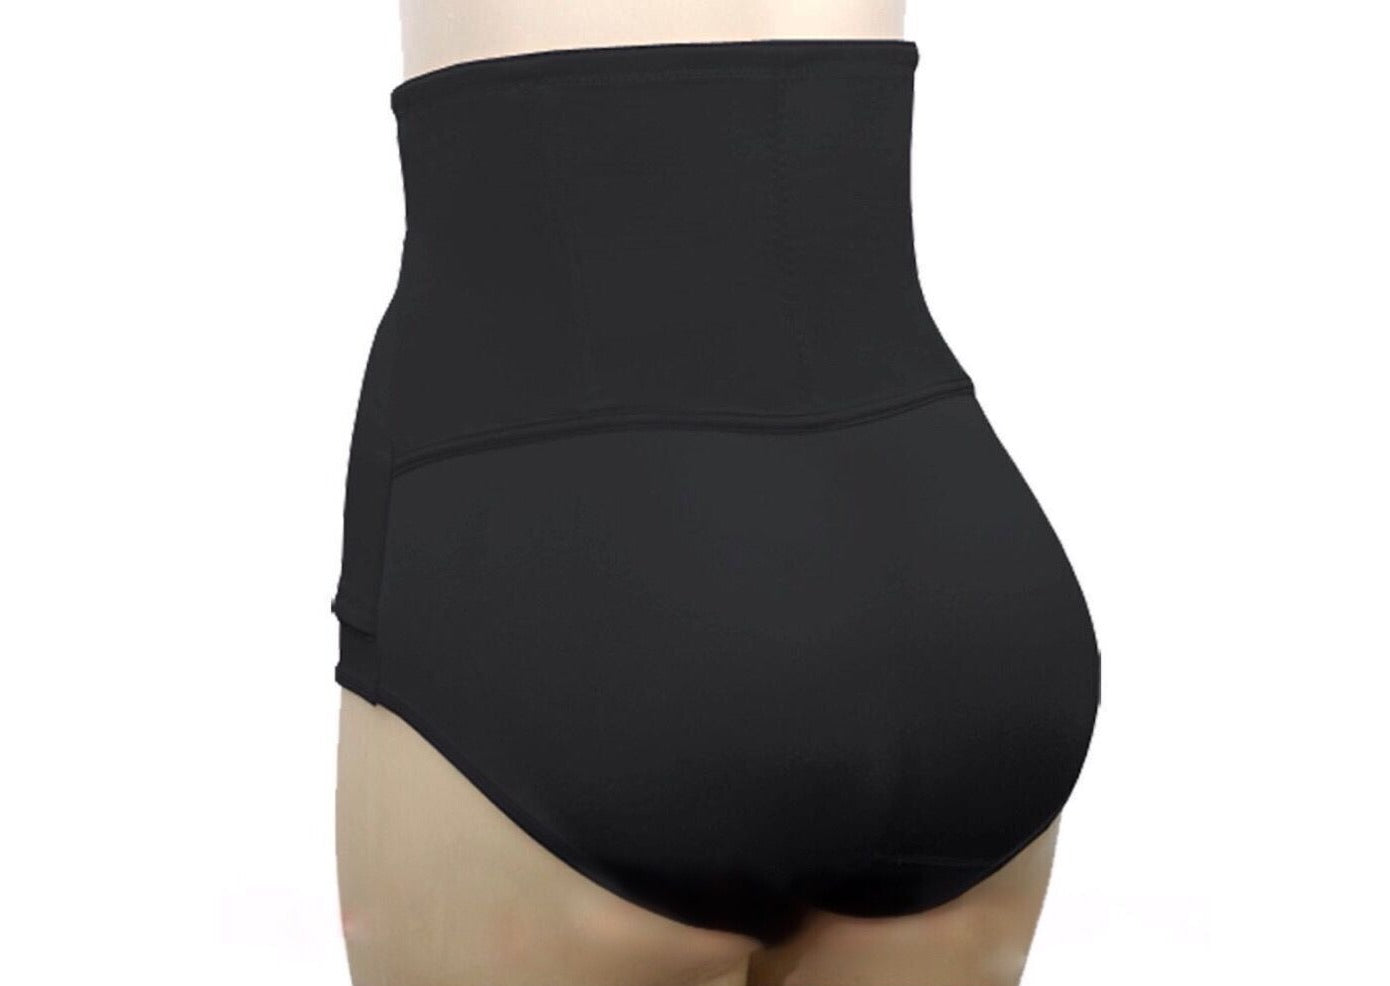 Waist Trimmer with Padded Panties